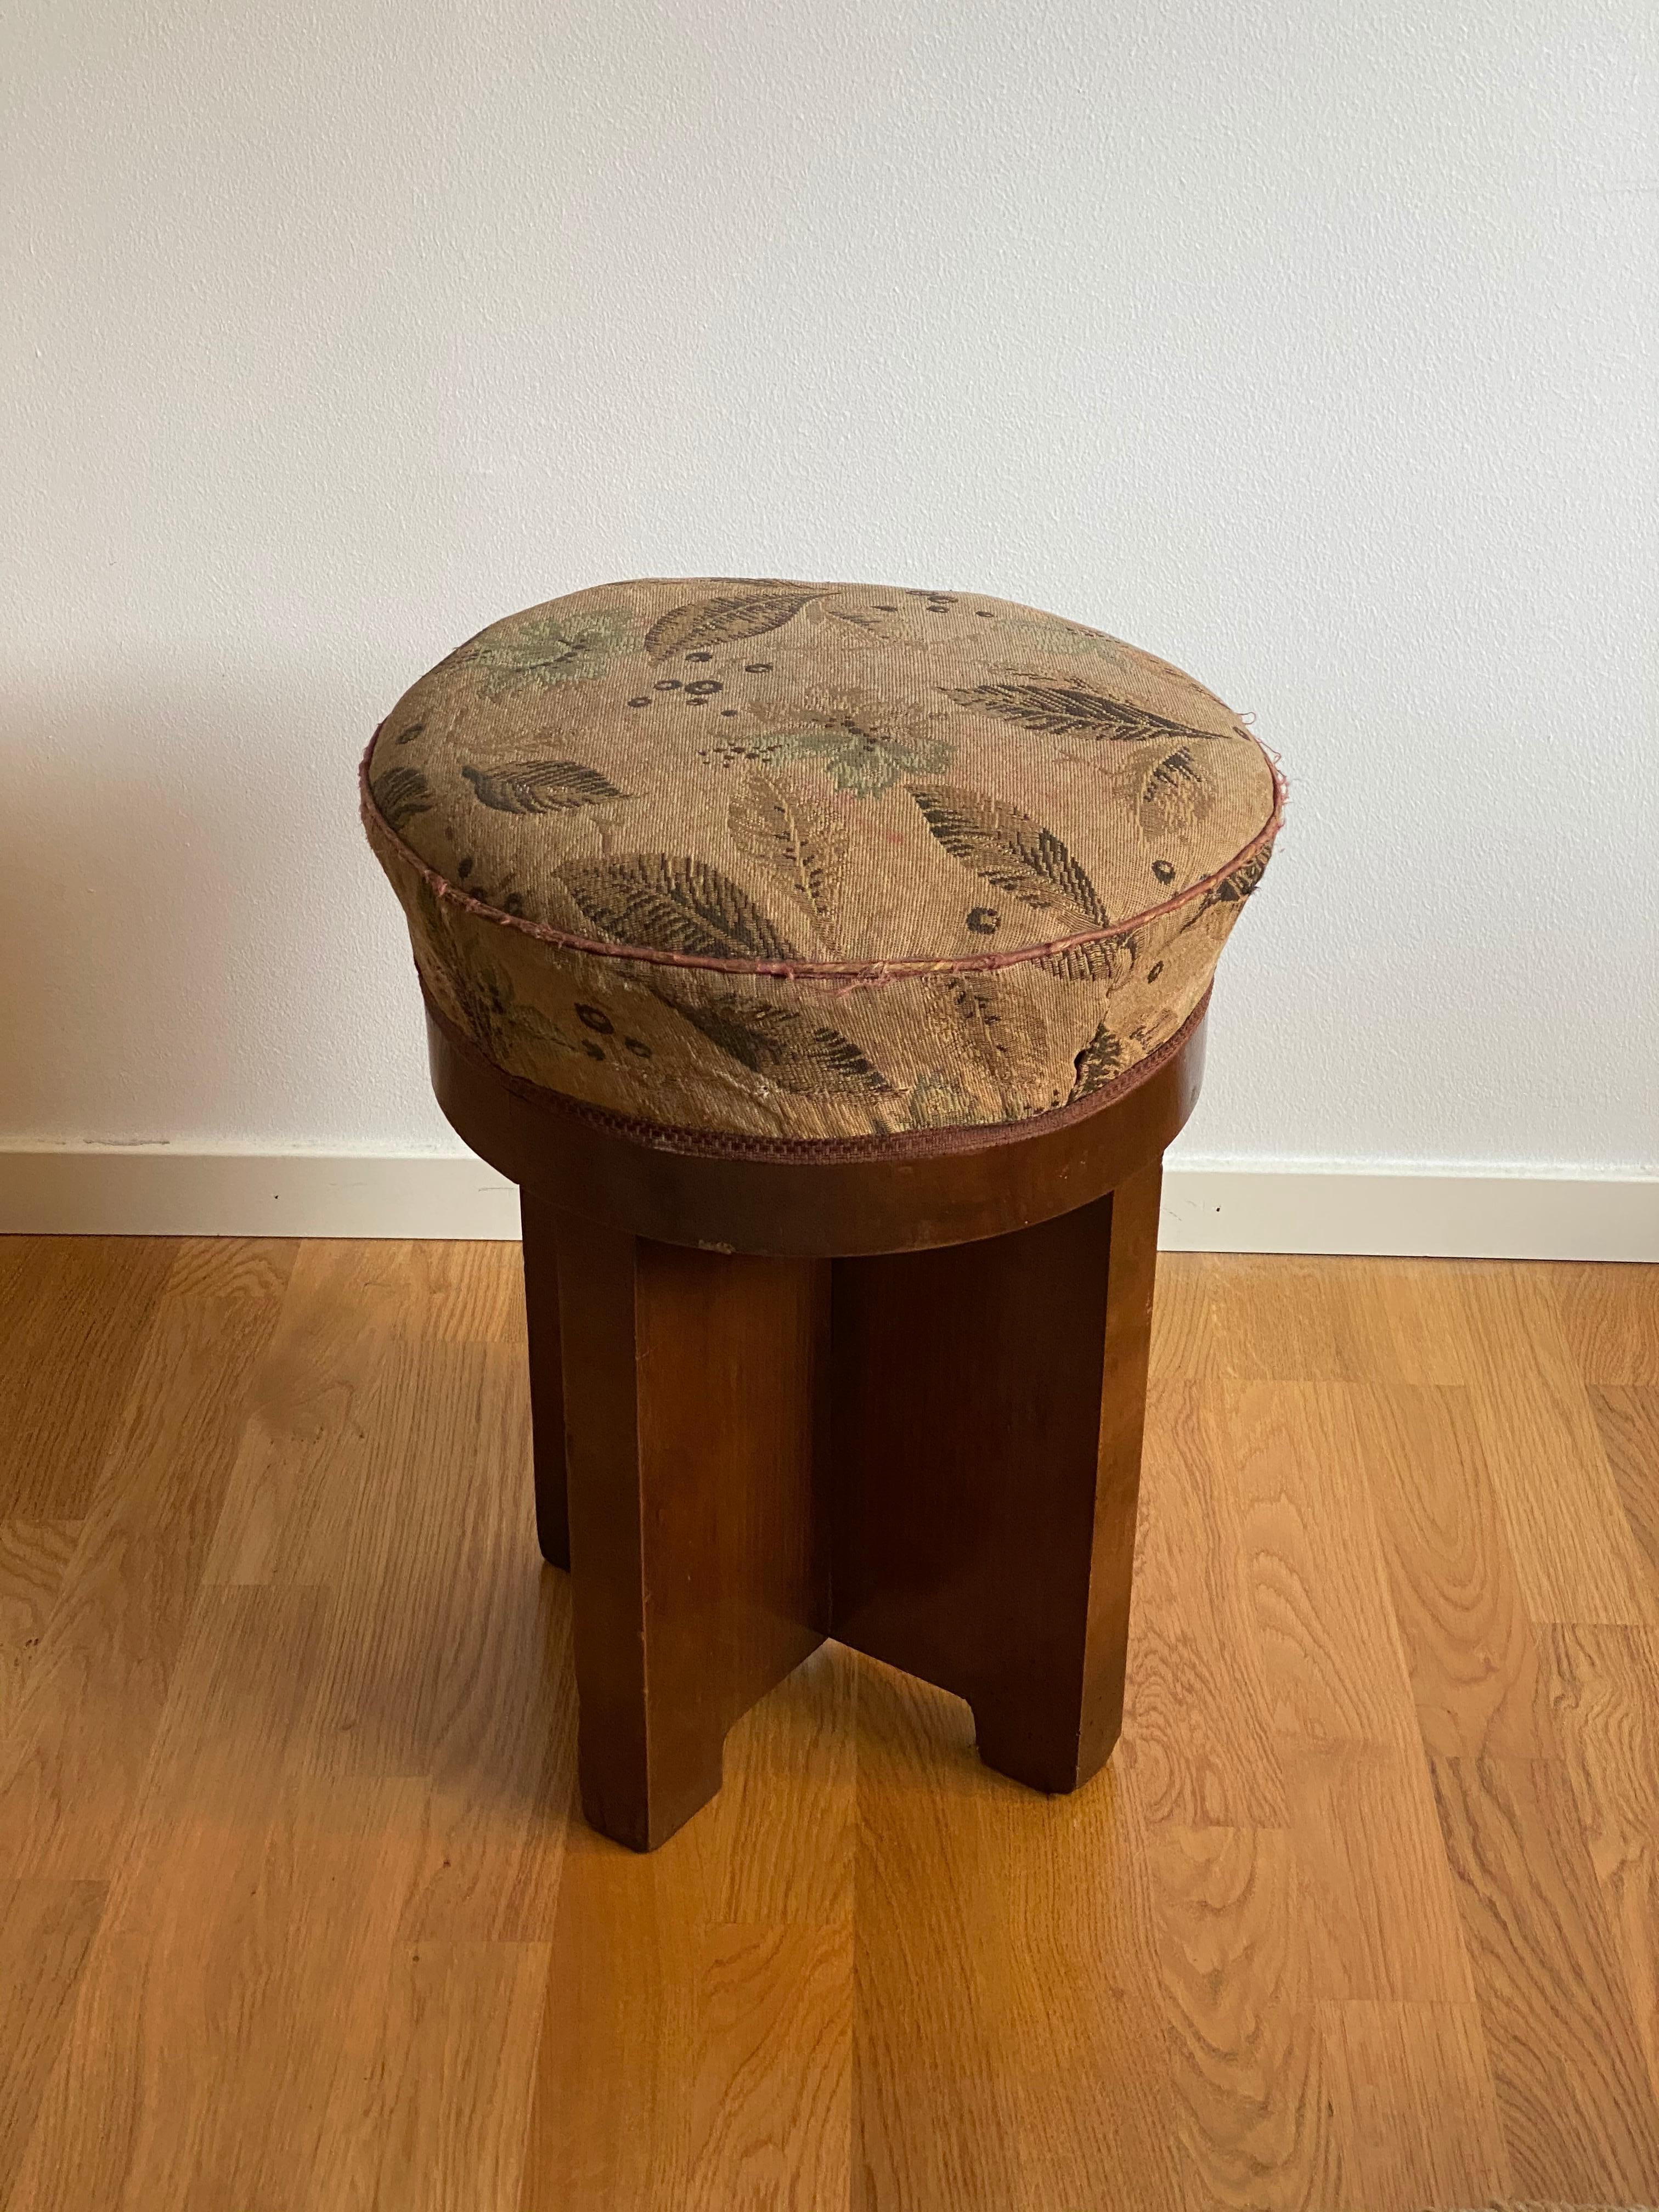 An all original 1930s modernist / Art Deco stool. Features original veneered wood and spring seat with original fabric. This work needs to be fully restored.

Other designers of the period include Axel Einar Hjorth, Alvar Aalto, Josef Frank, and